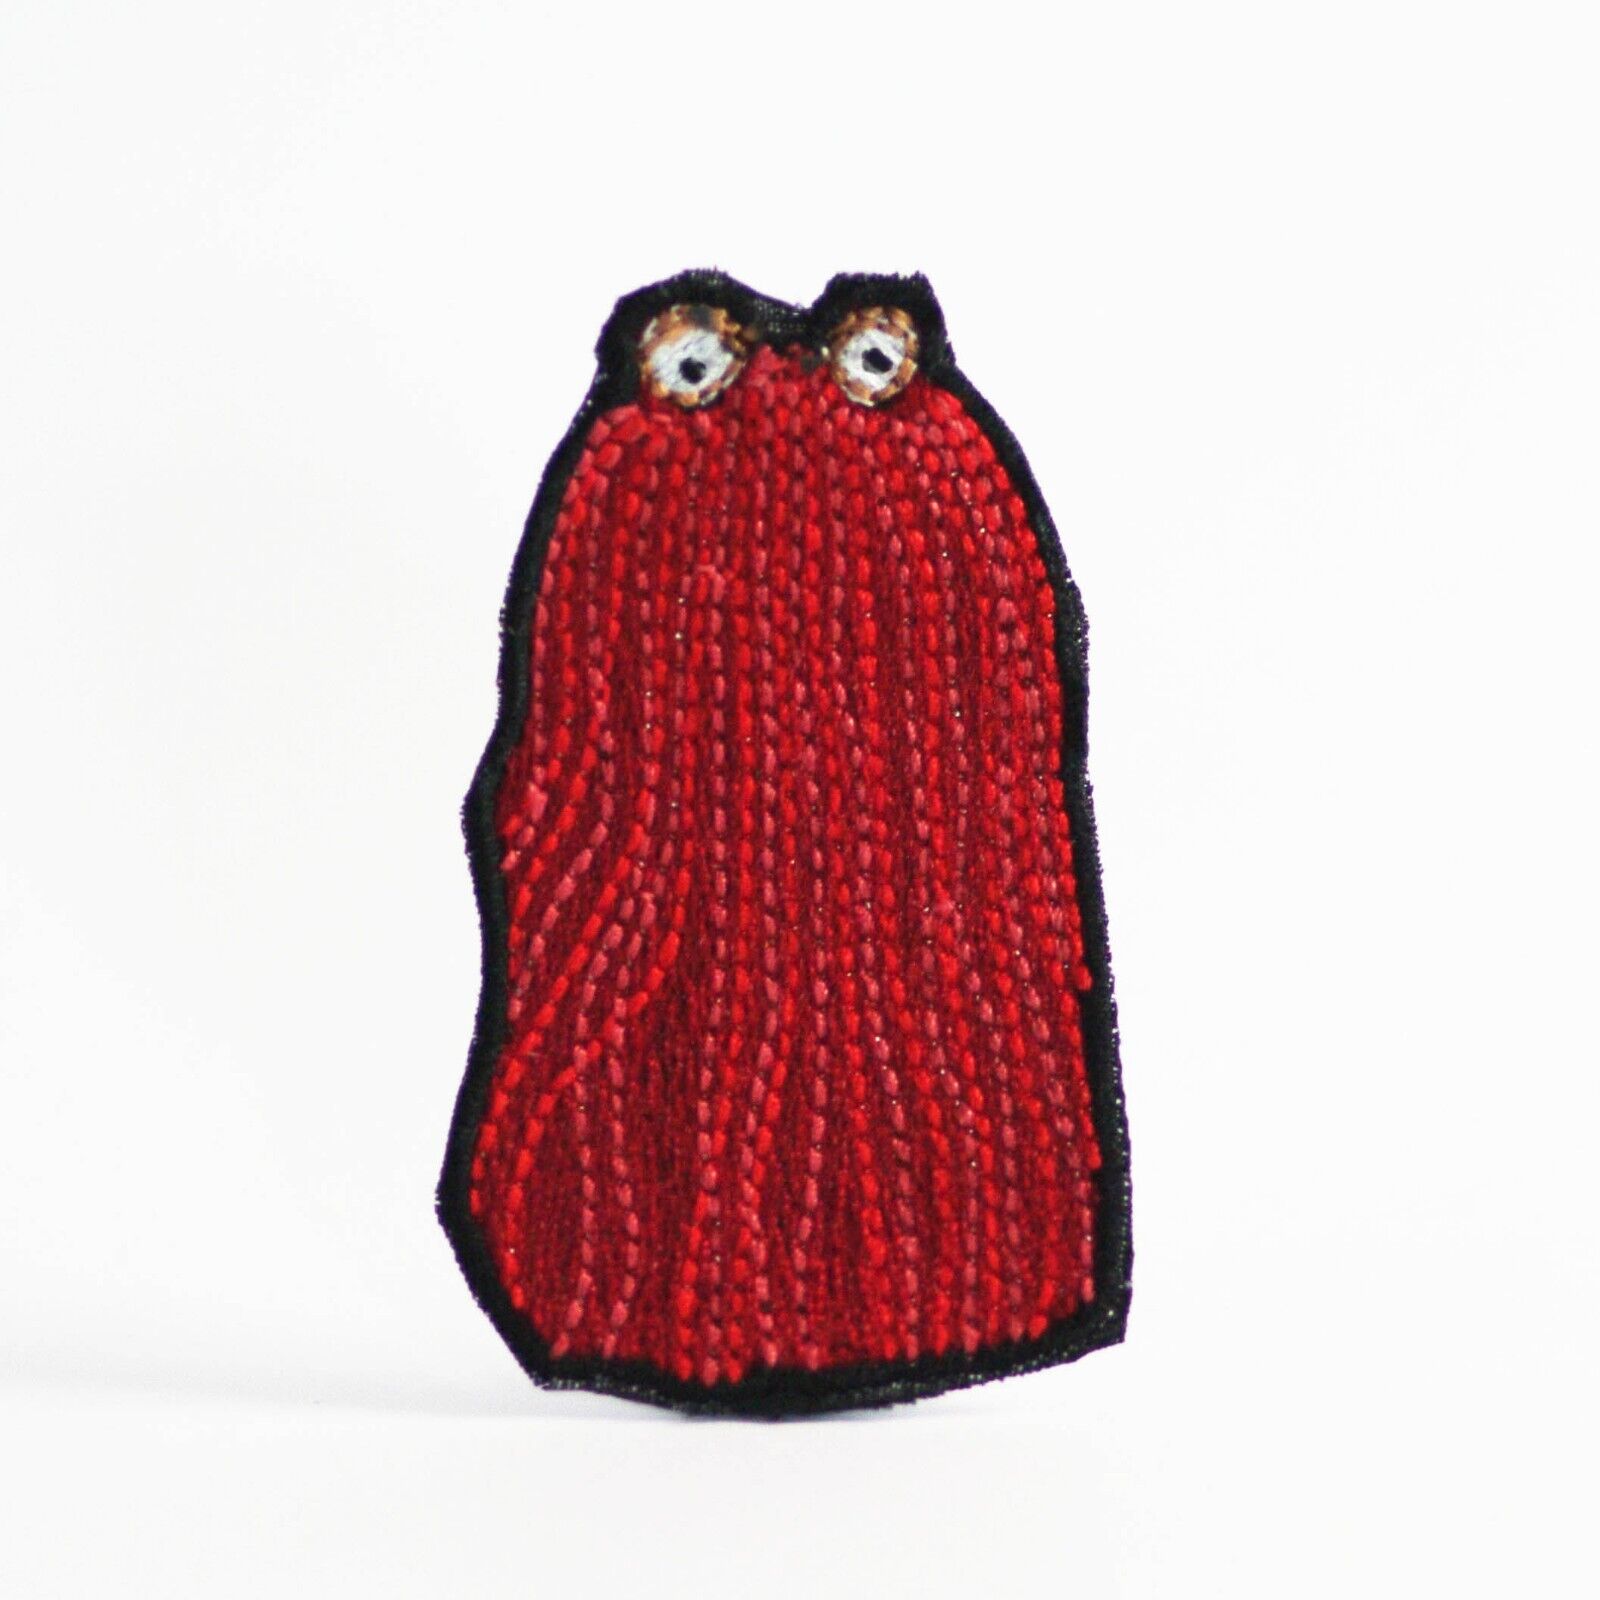 Don\'t Hug Me I\'m Scared - Red Guy embroidered patch. Sew/Iron on. 5.1cm x 8.5cm